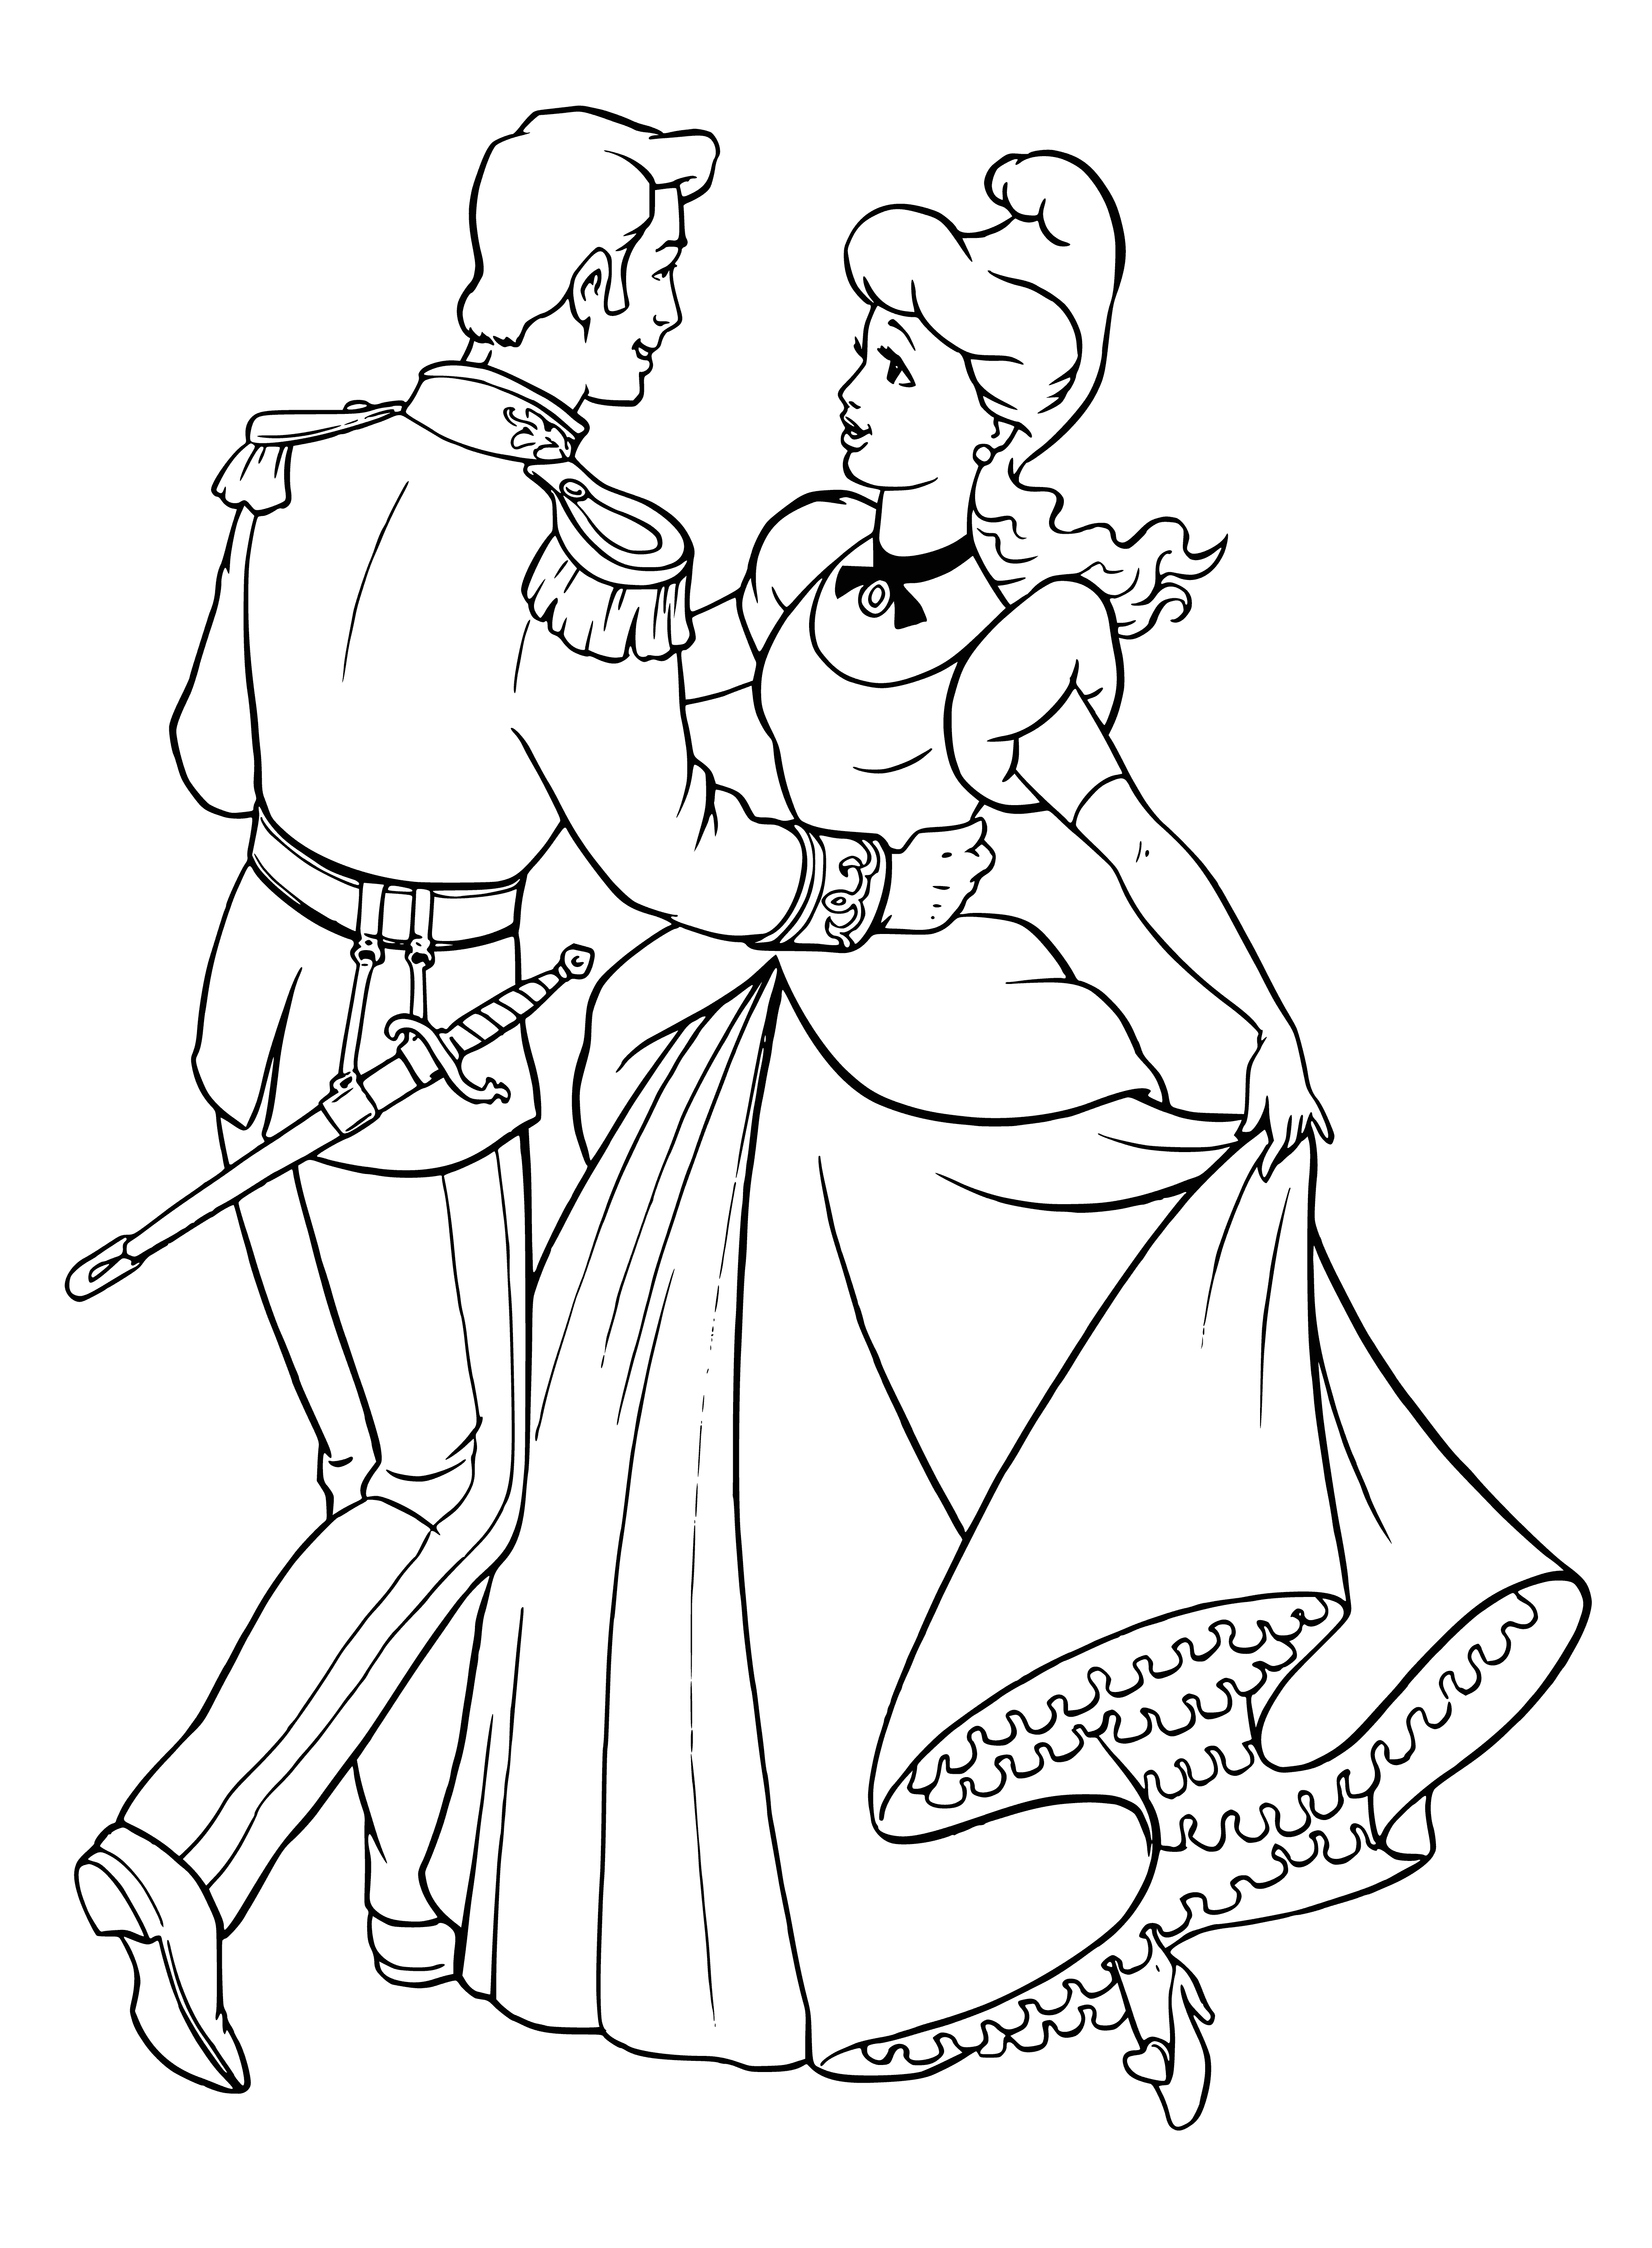 Cinderella and the Prince coloring page